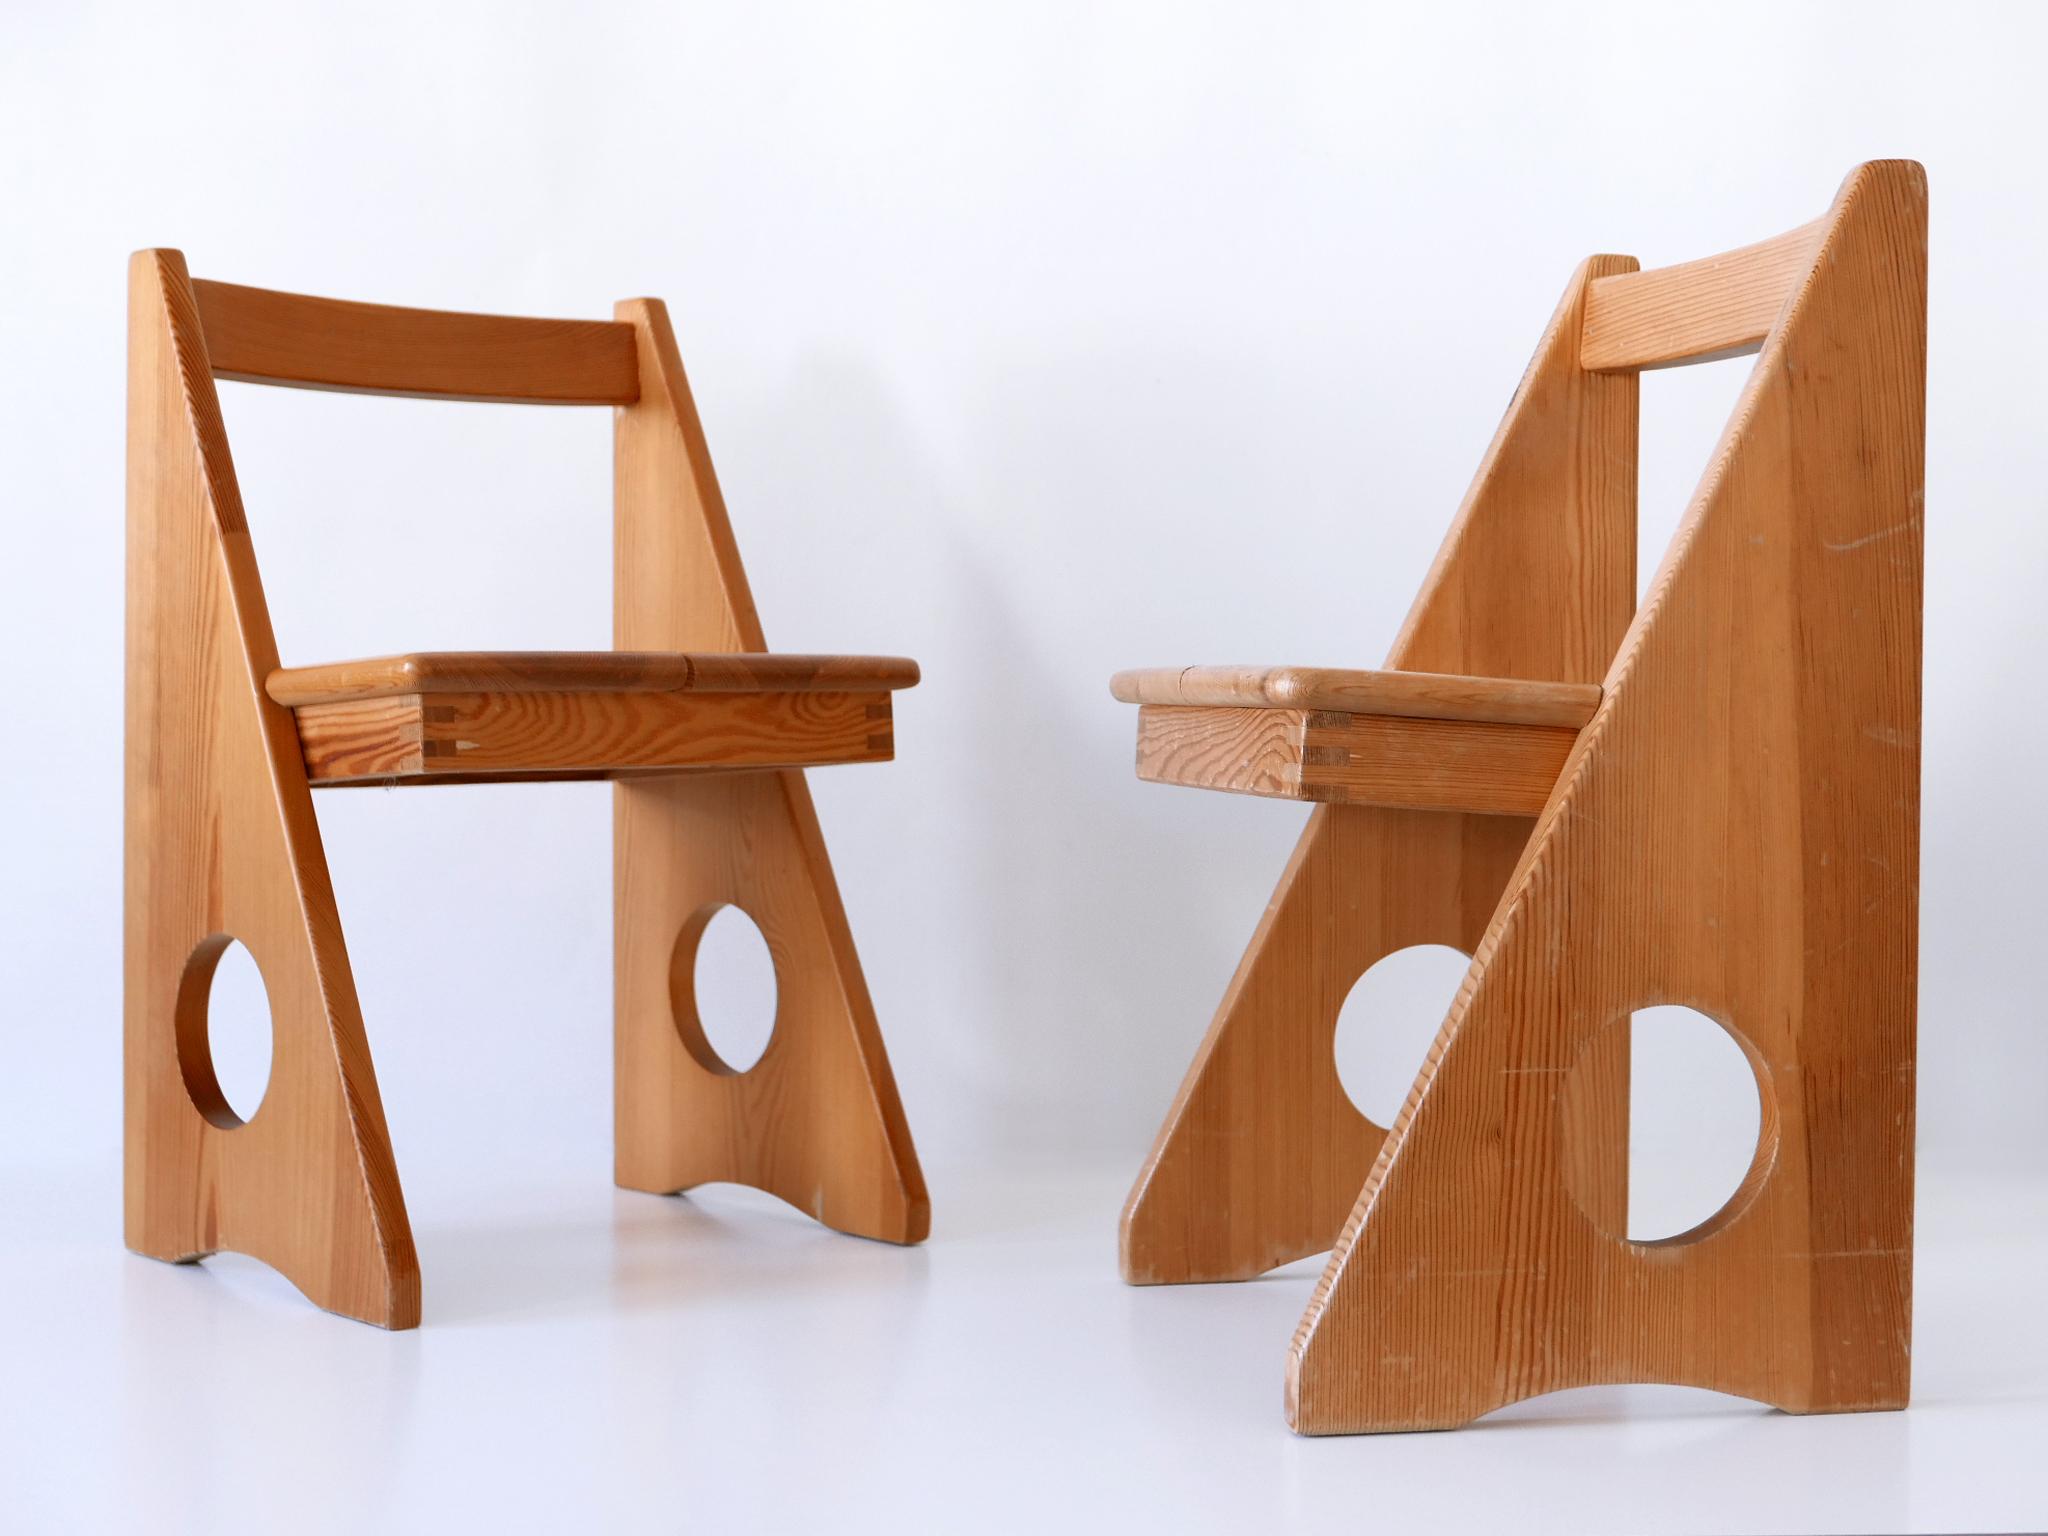 Set of two extremely rare and highly decorative Mid-Century Modern children's chairs by Gilbert Marklund for Furusnickaren AB, Sweden, 1970s.

Executed in massive pine wood.

Overall measurements:
H 20.87 in. (53 cm)
W 13.39 in. (34 cm)
D